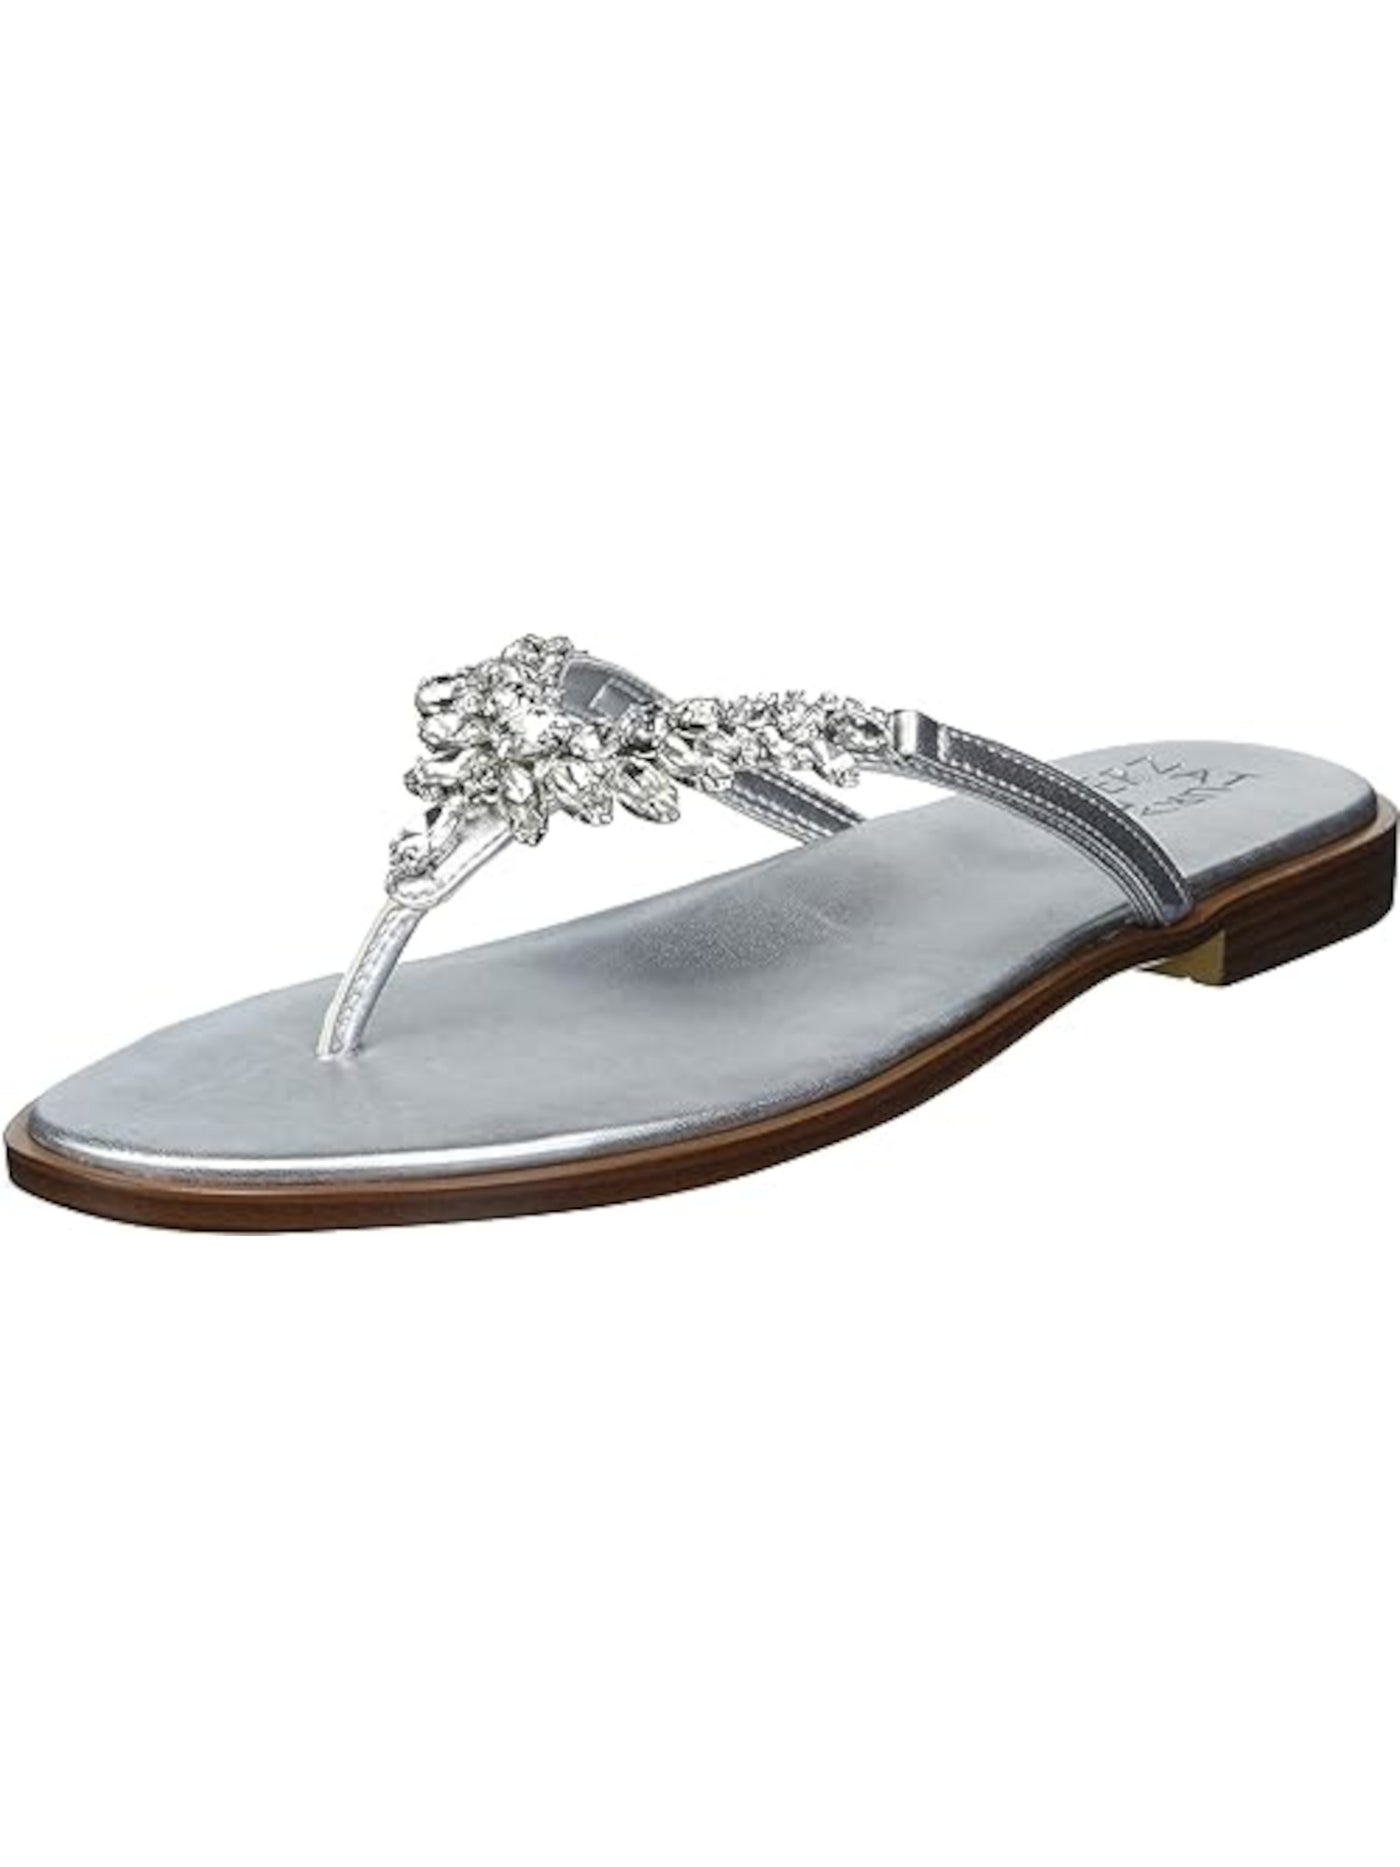 NATURALIZER Womens Silver Embellished Fallyn Round Toe Slip On Thong Sandals Shoes 6.5 M